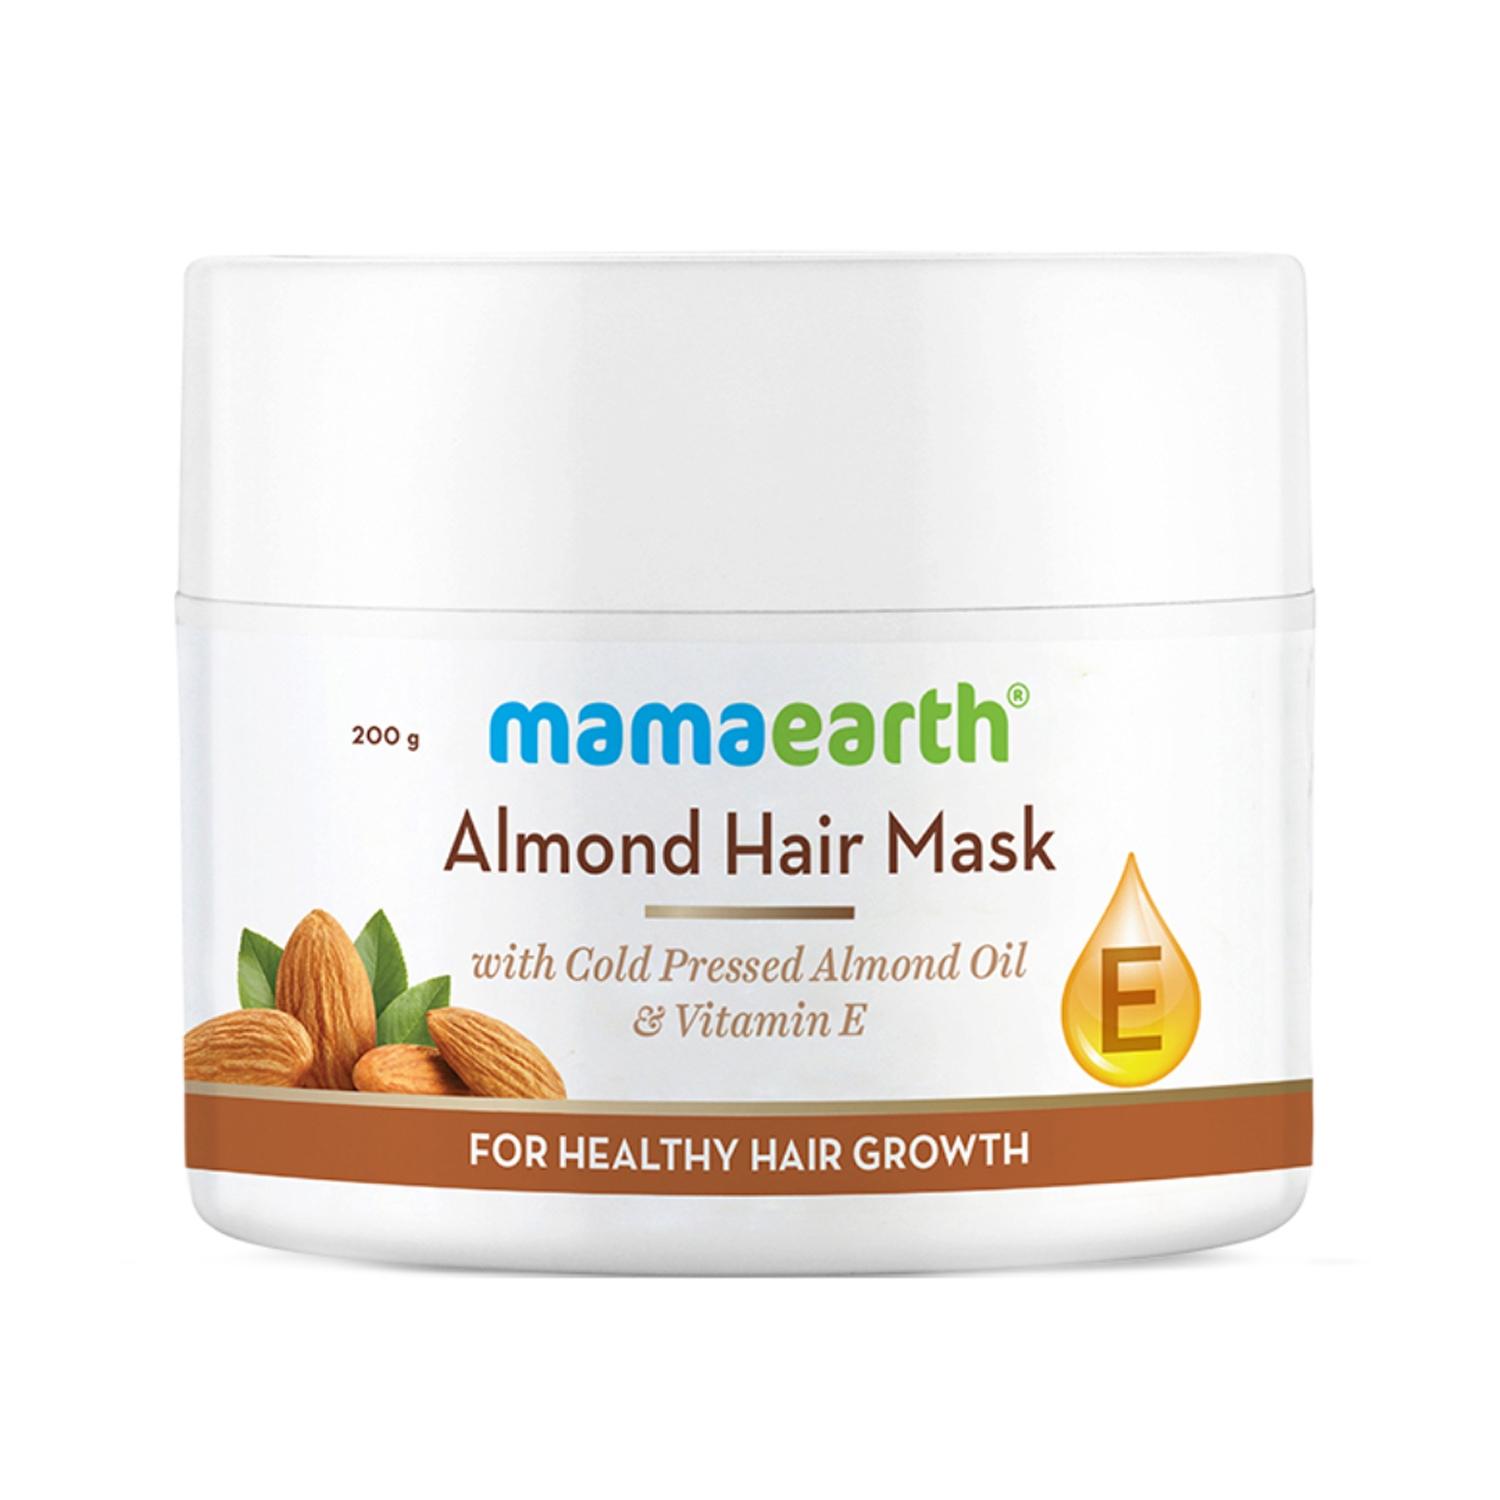 Mamaearth Almond Hair Mask With Cold Pressed Almond Oil & Vitamin E (200g)